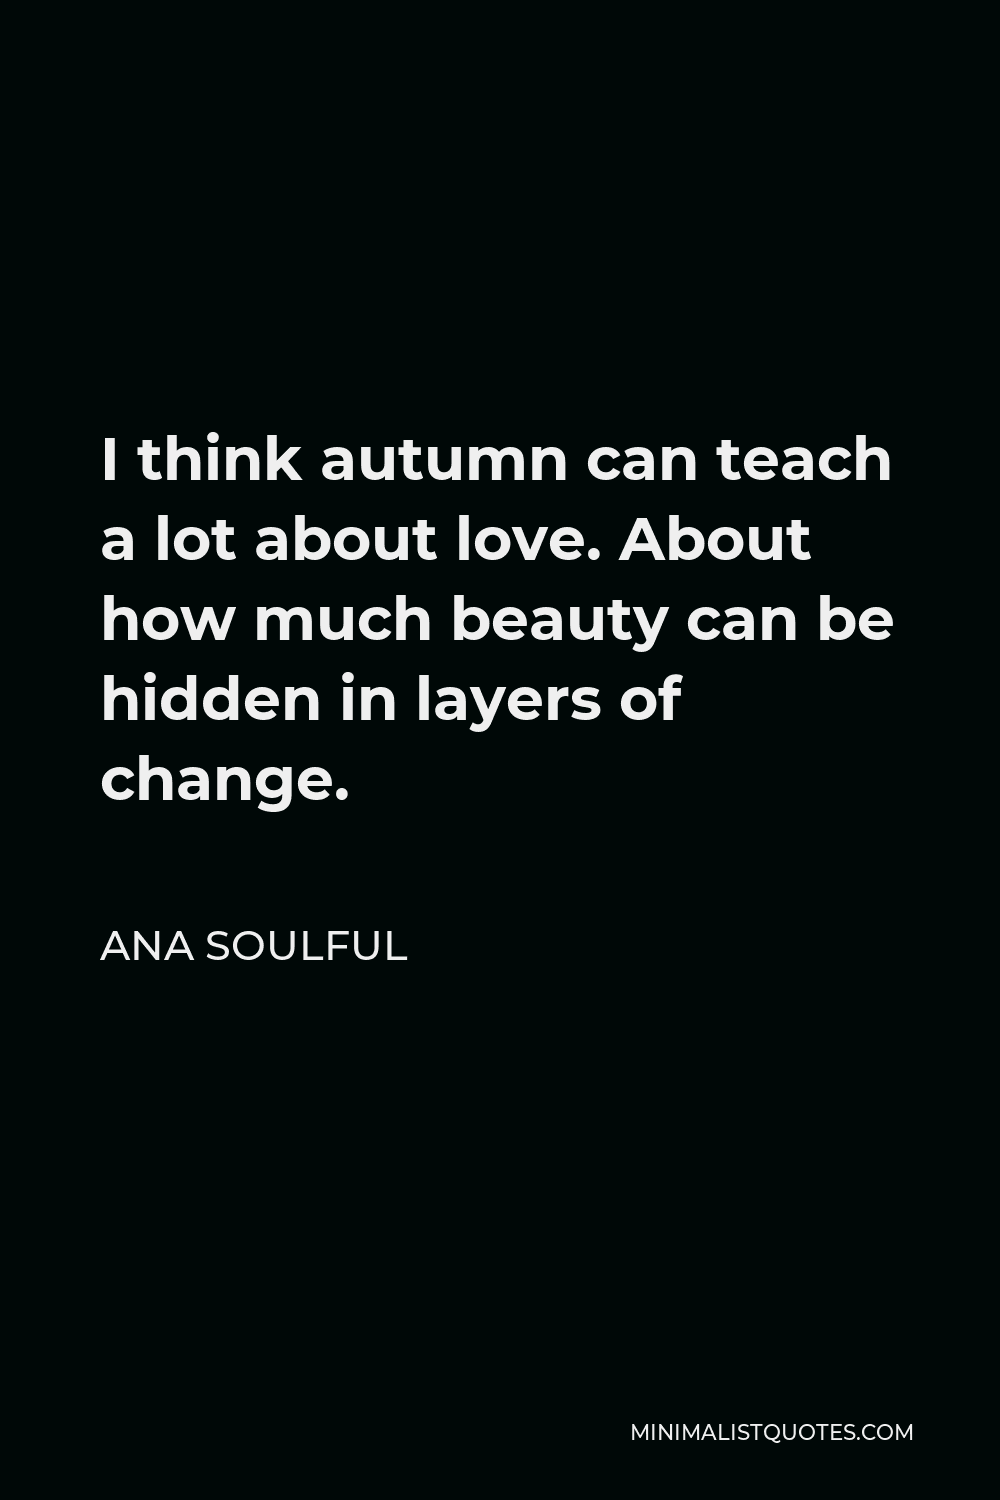 Ana Soulful Quote - I think autumn can teach a lot about love. About how much beauty can be hidden in layers of change.